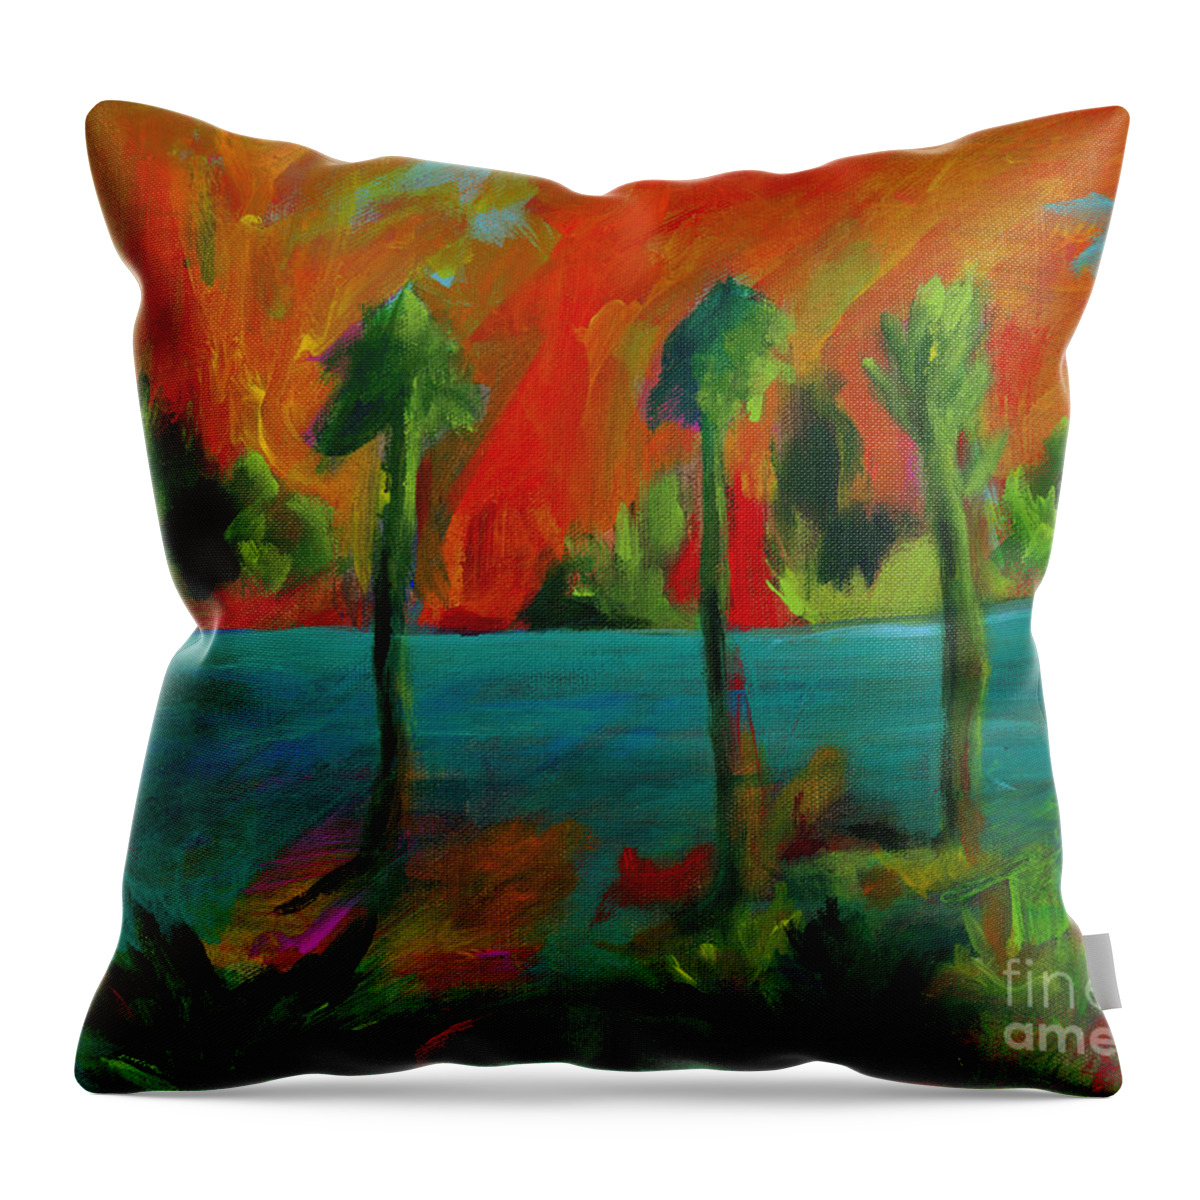 Florida Throw Pillow featuring the painting Palm Trio Sunset by Elizabeth Fontaine-Barr